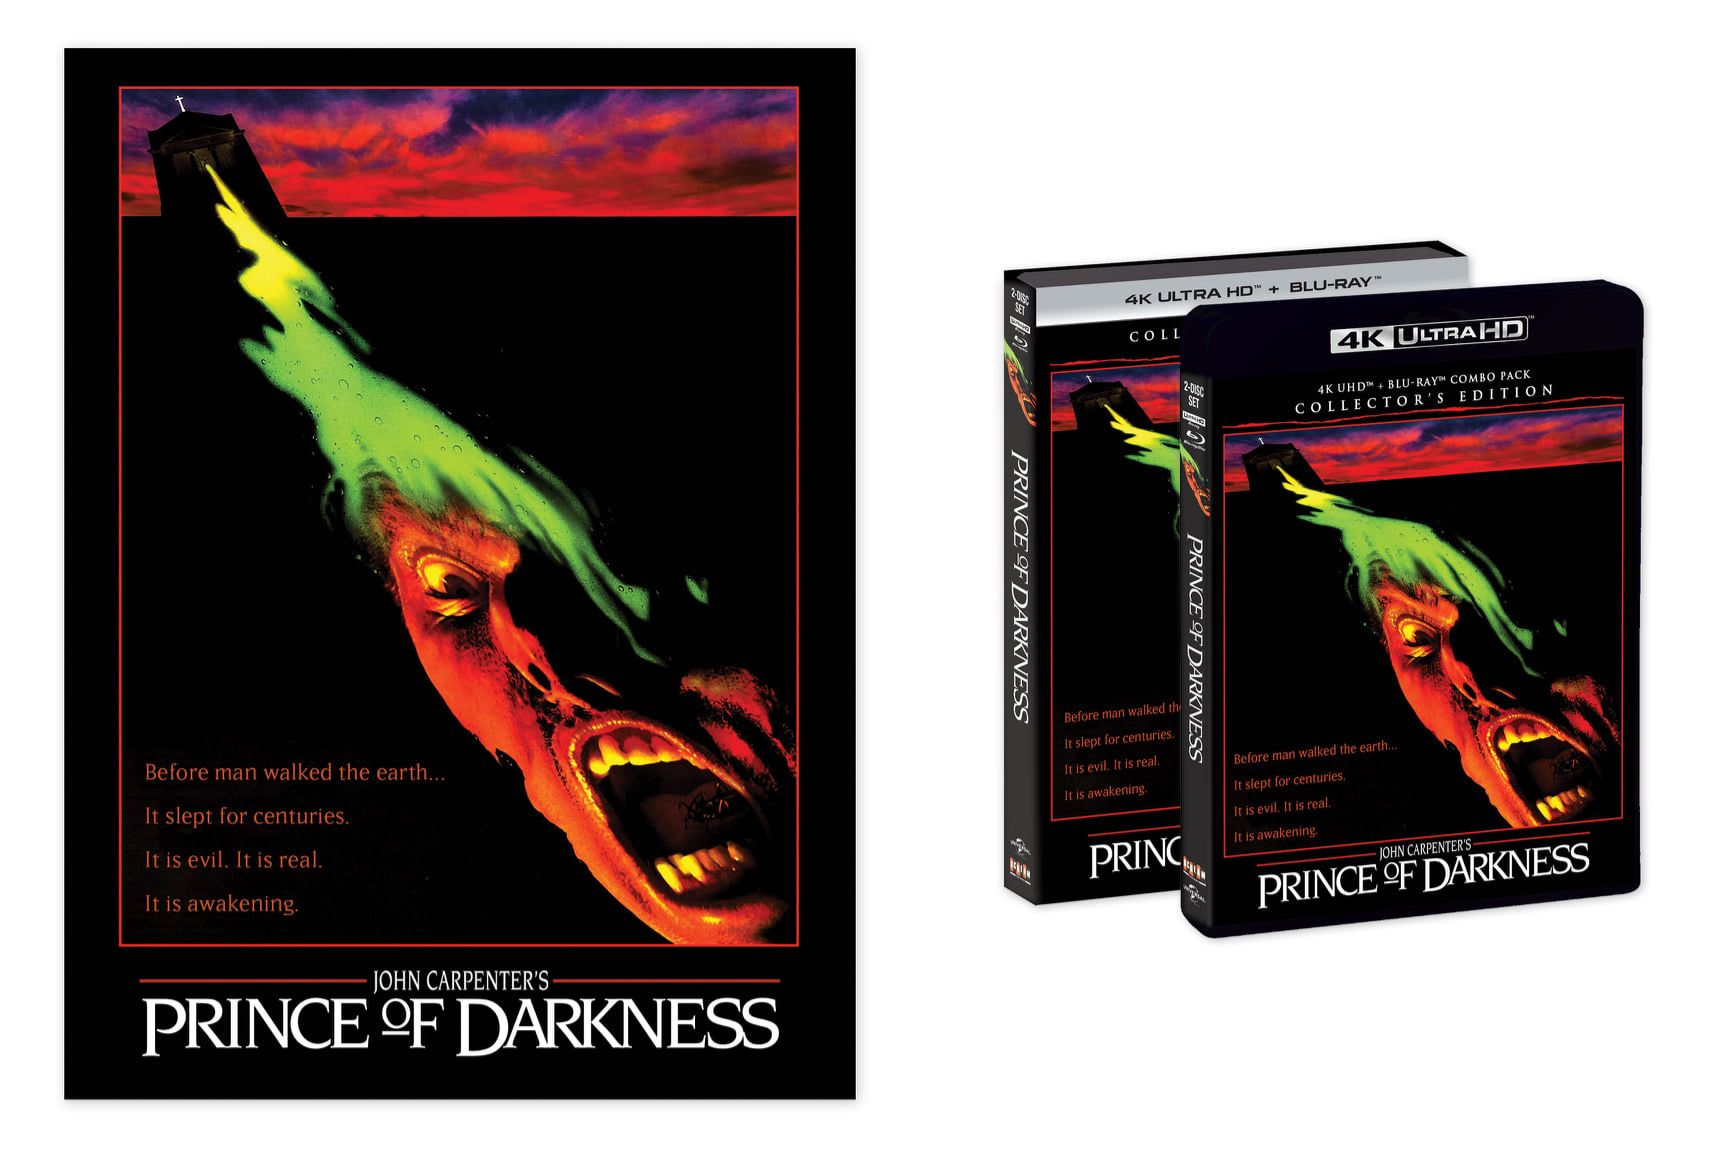 Prince of Darkness 4K Collector's Edition Blu-ray